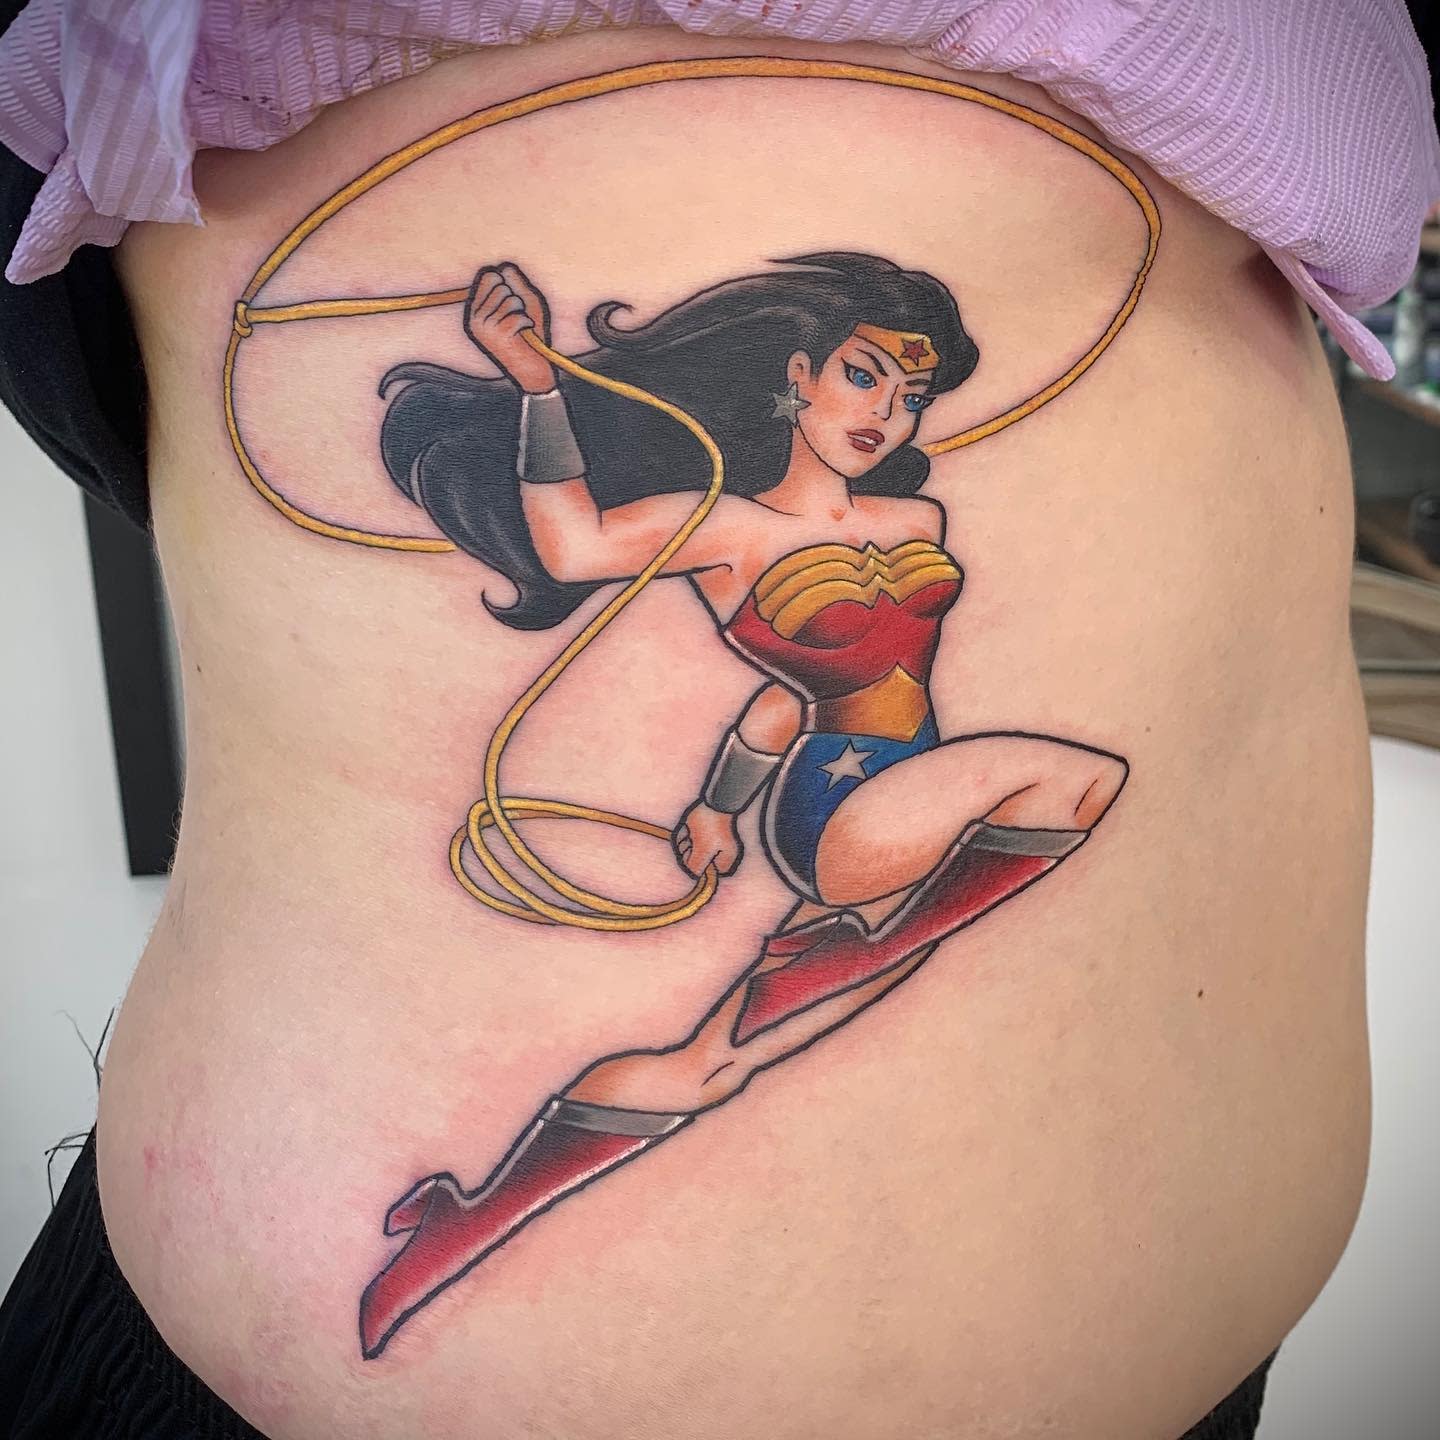 The Top 45 Wonder Woman Tattoo Ideas - [2021 Inspiration Guide]